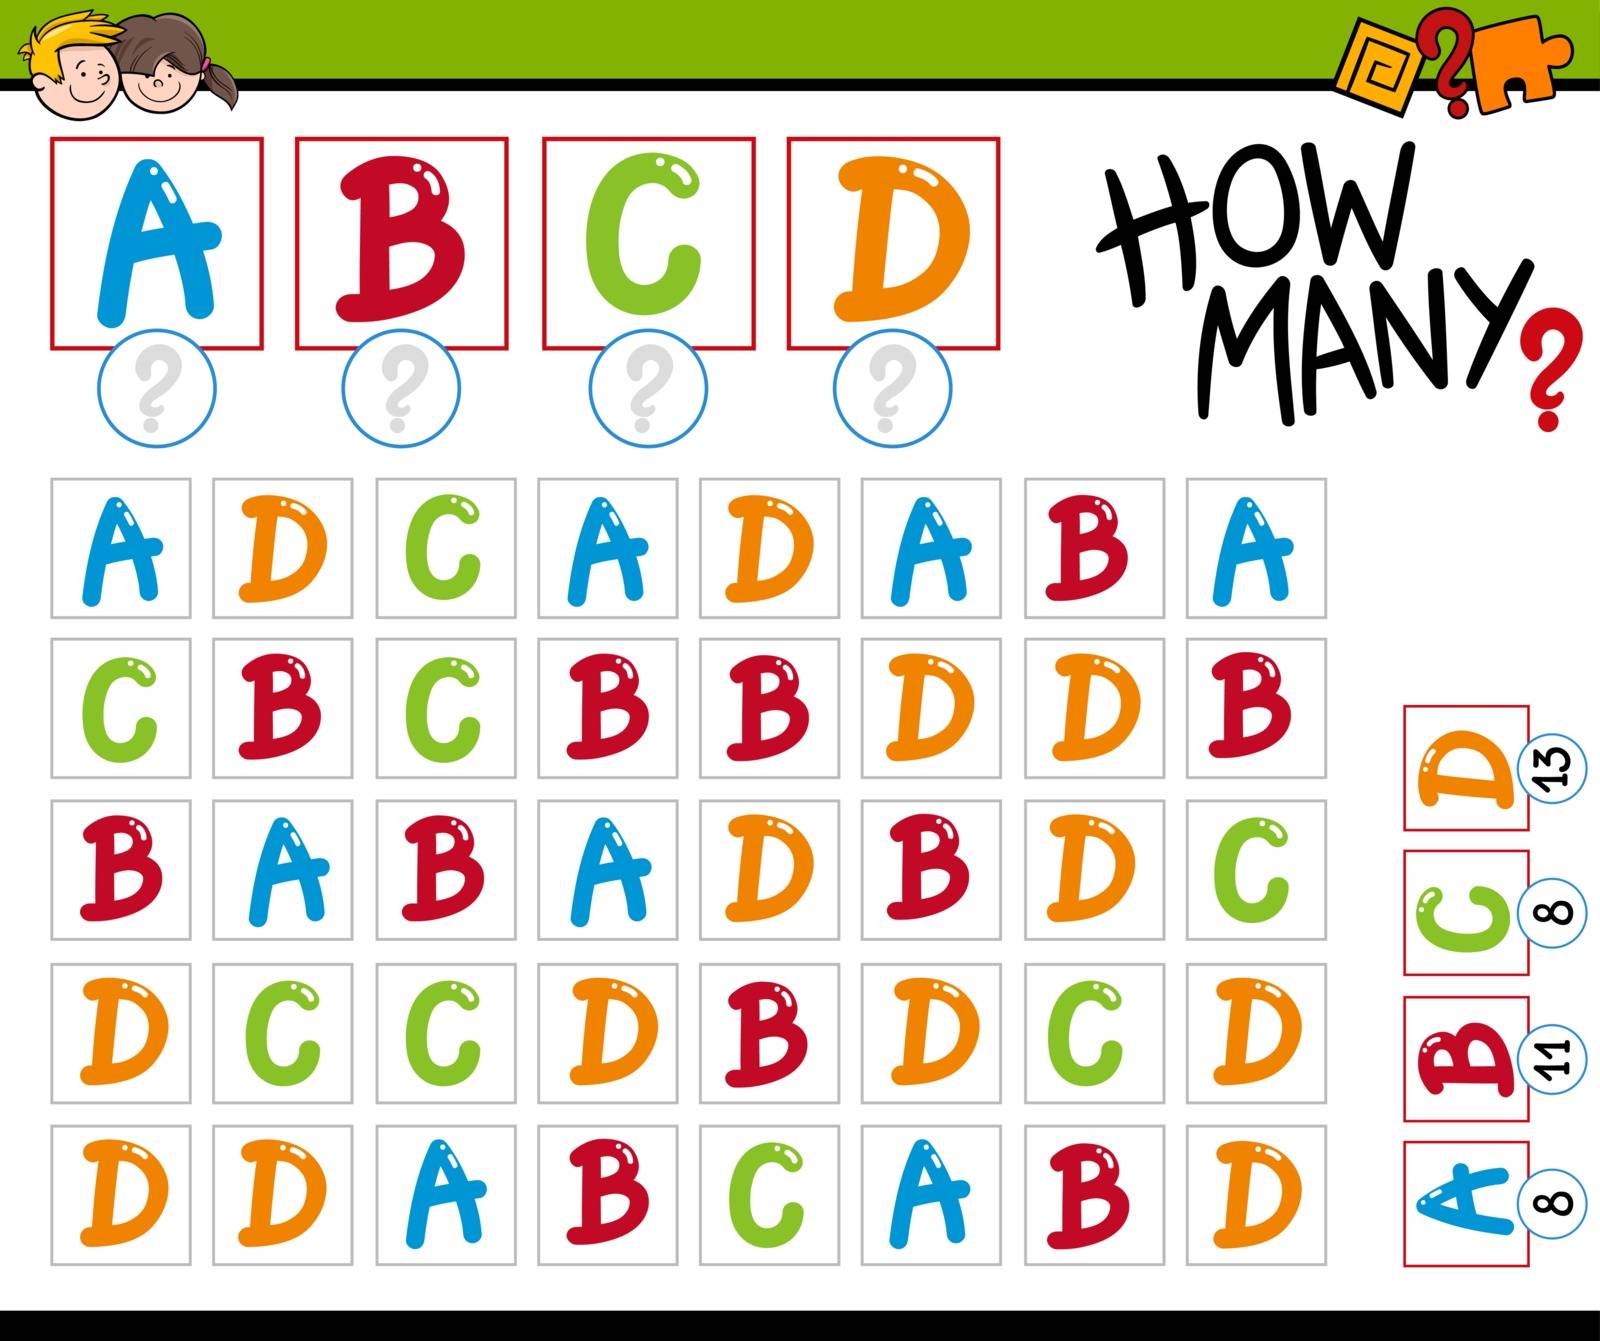 Cartoon Illustration of Educational Counting Activity Task for Preschool Children with Letters